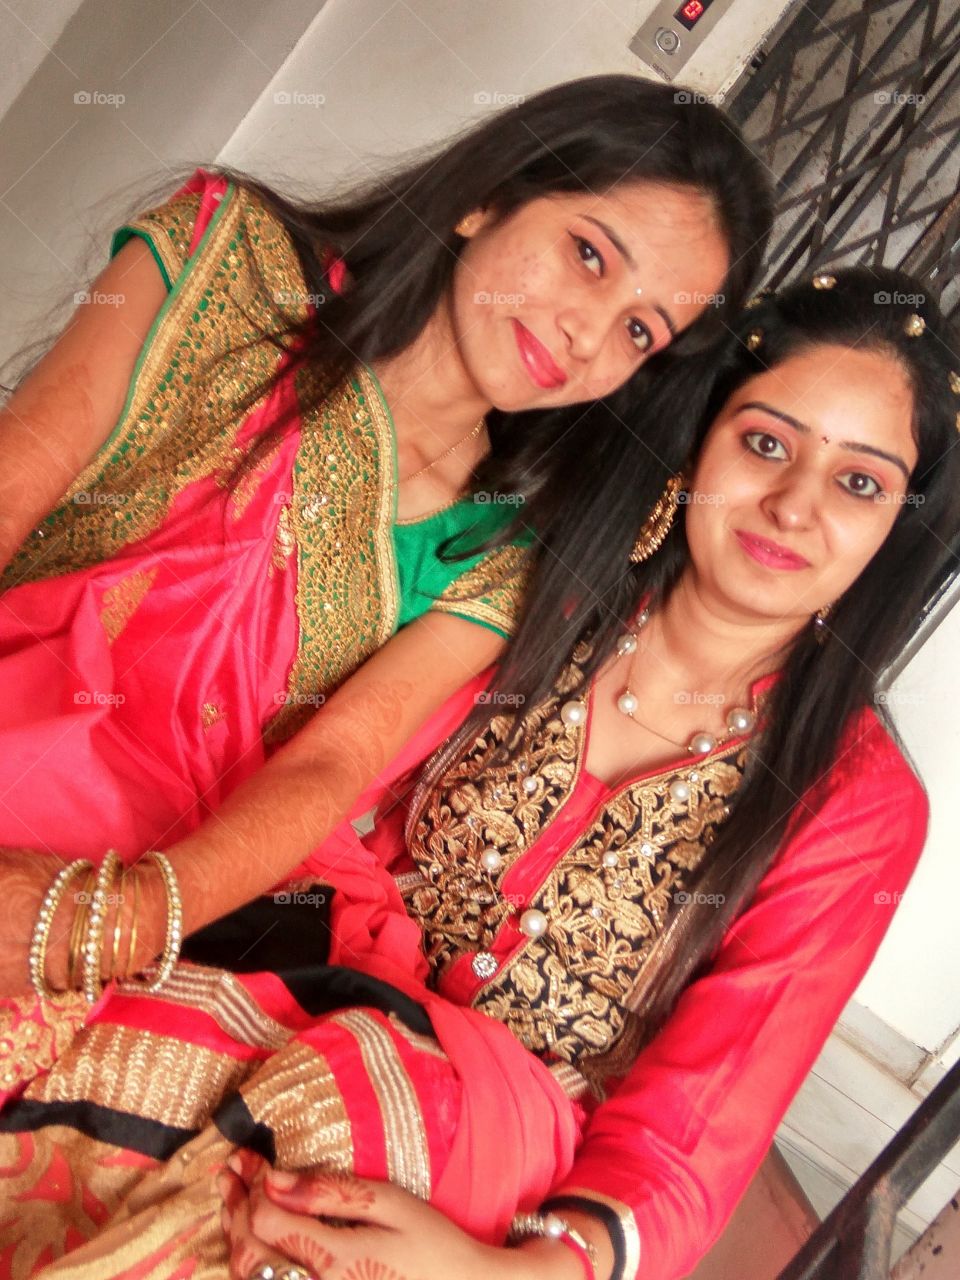 Me with my sister in law